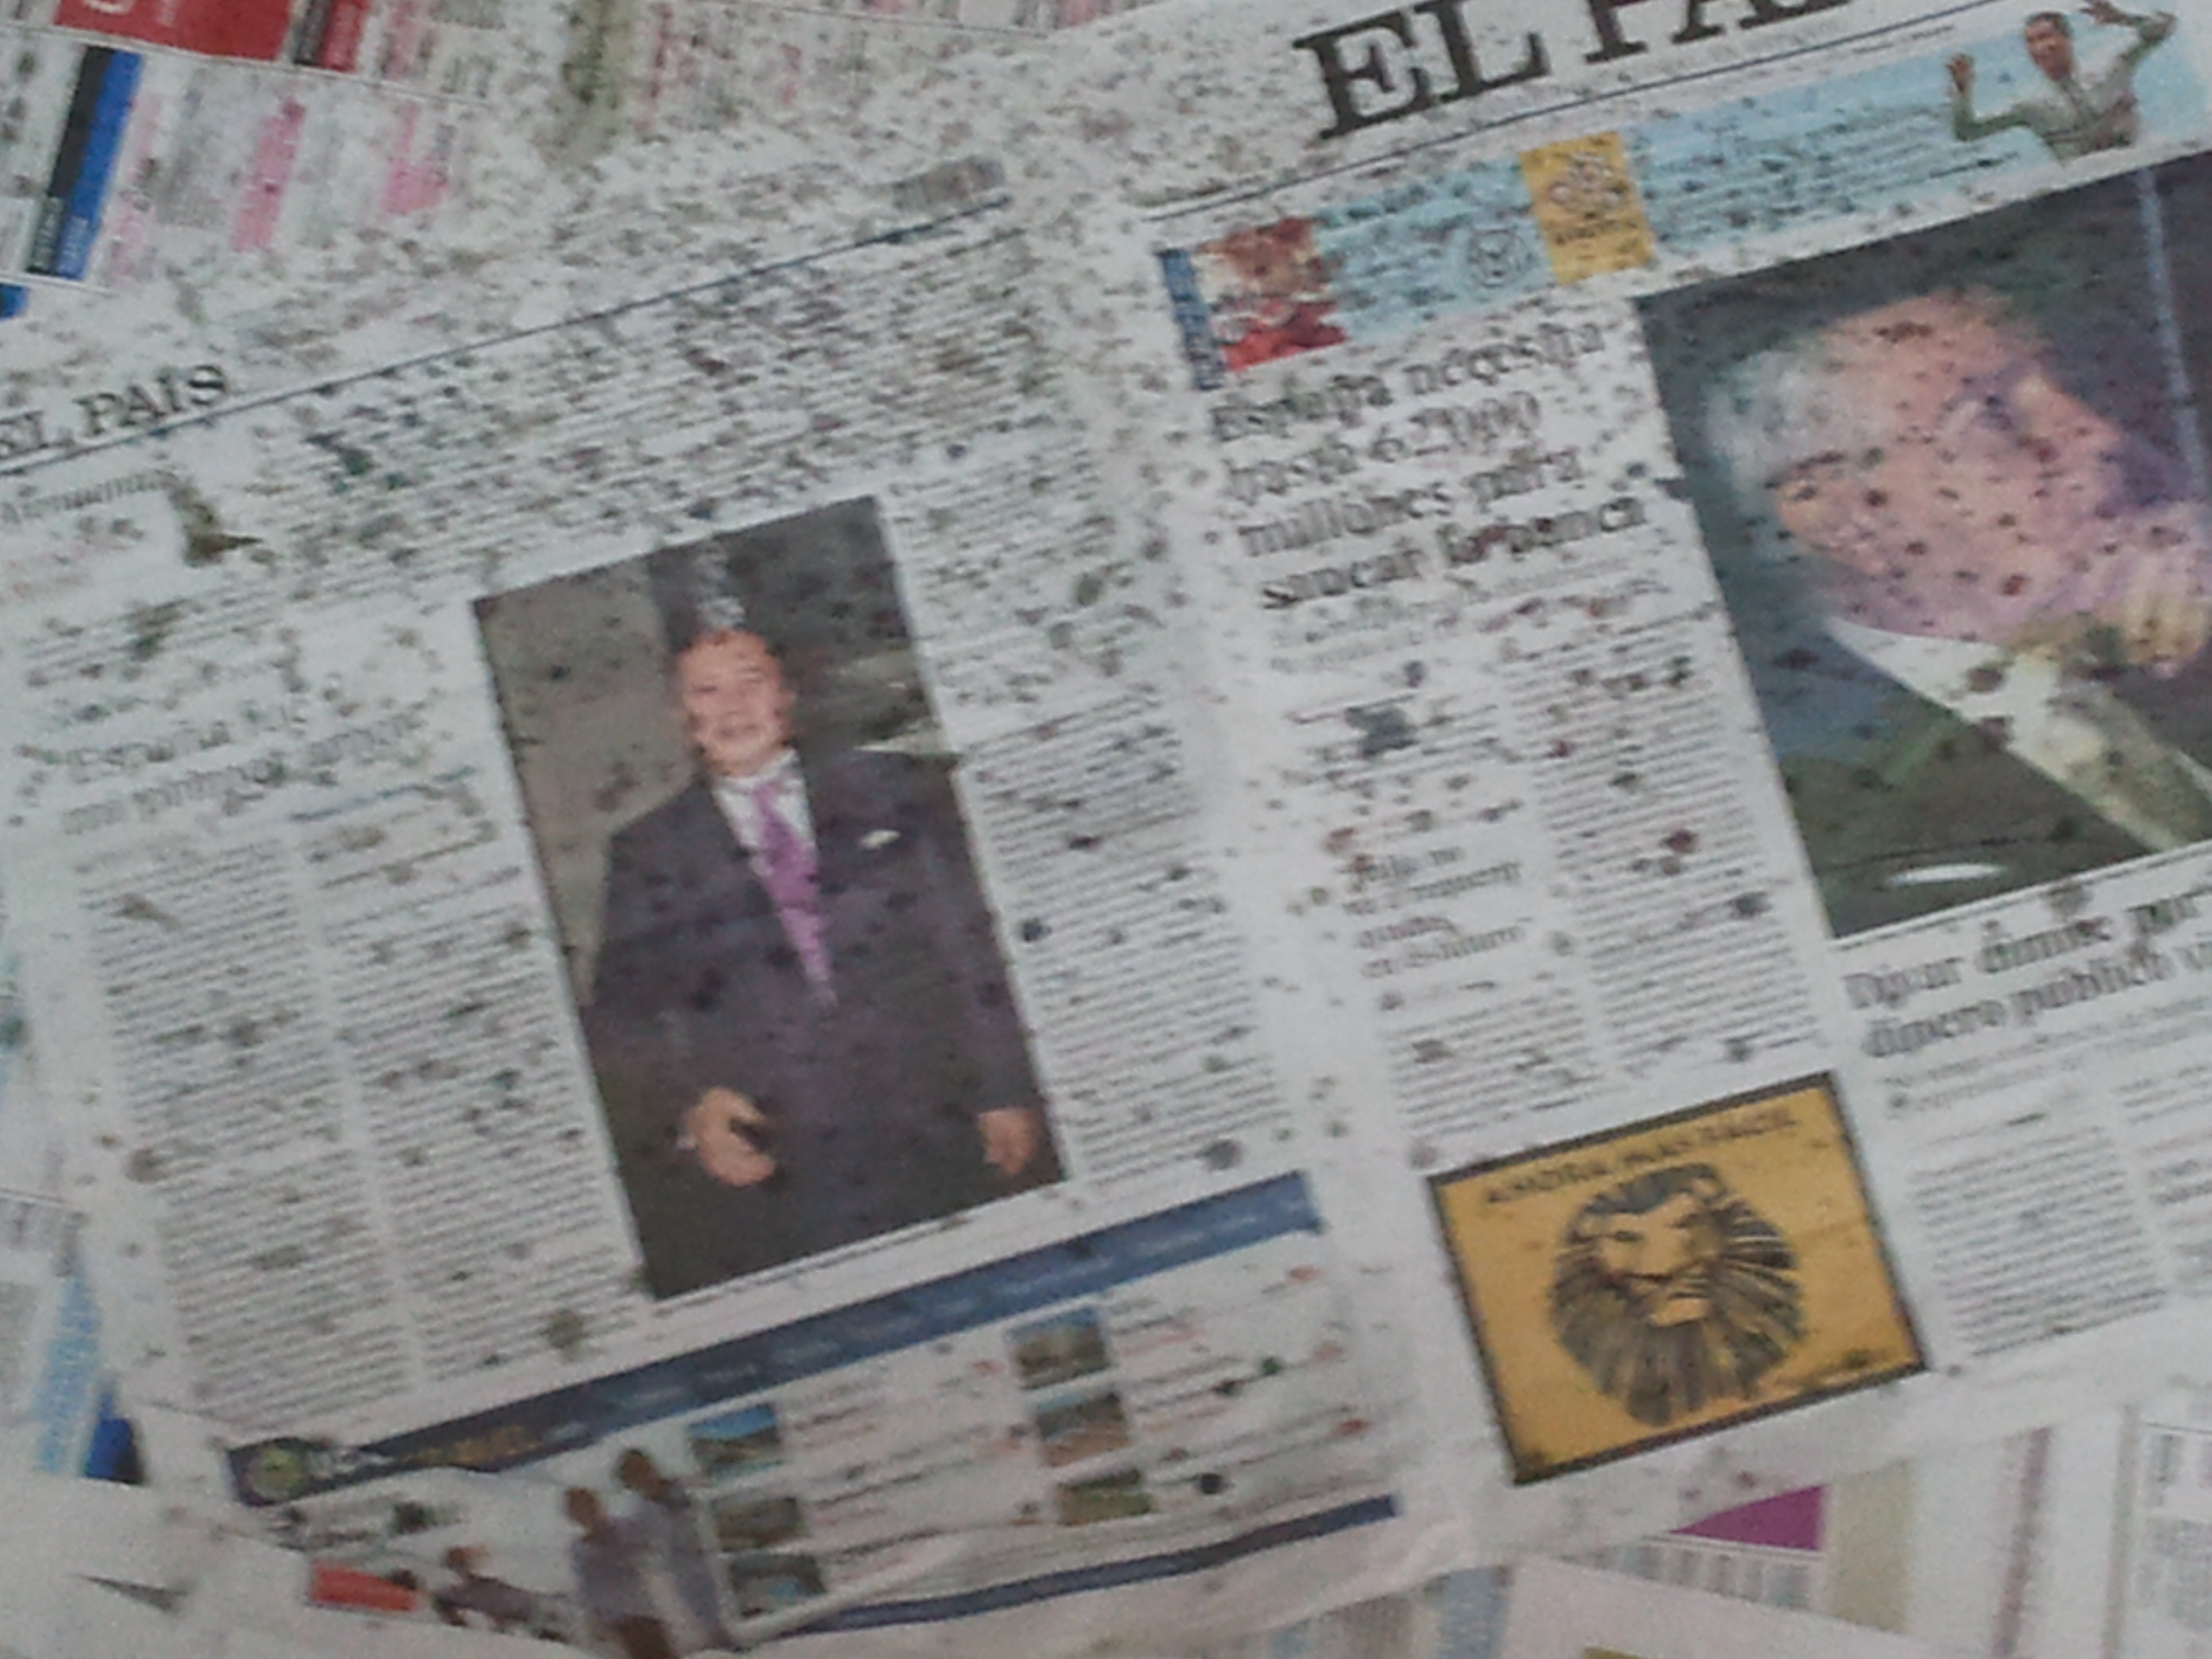 Detail of newspapers with oil stains